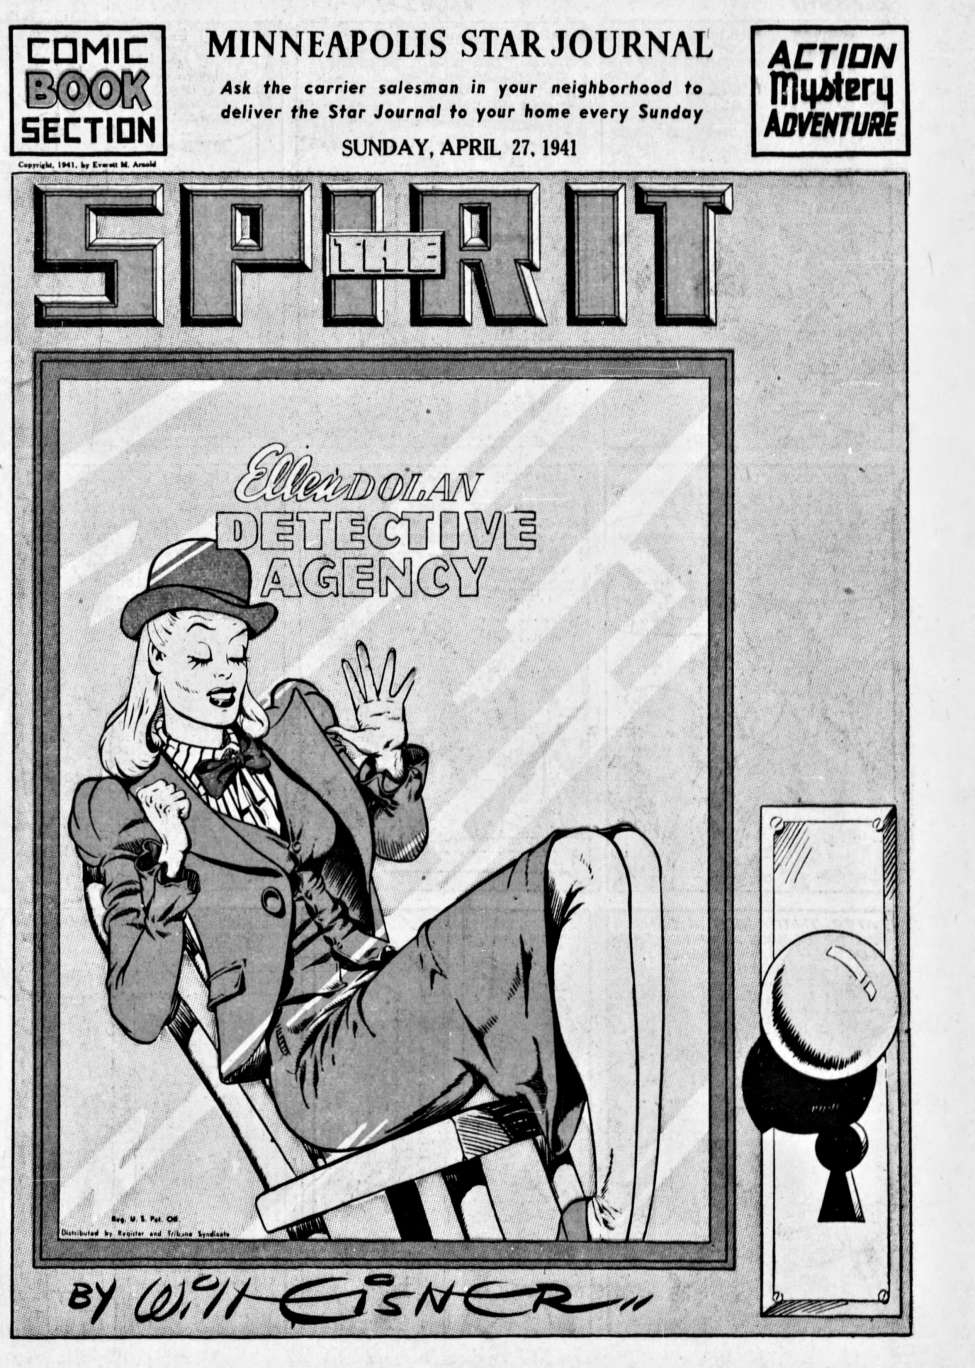 Book Cover For The Spirit (1941-04-27) - Minneapolis Star Journal (b/w)